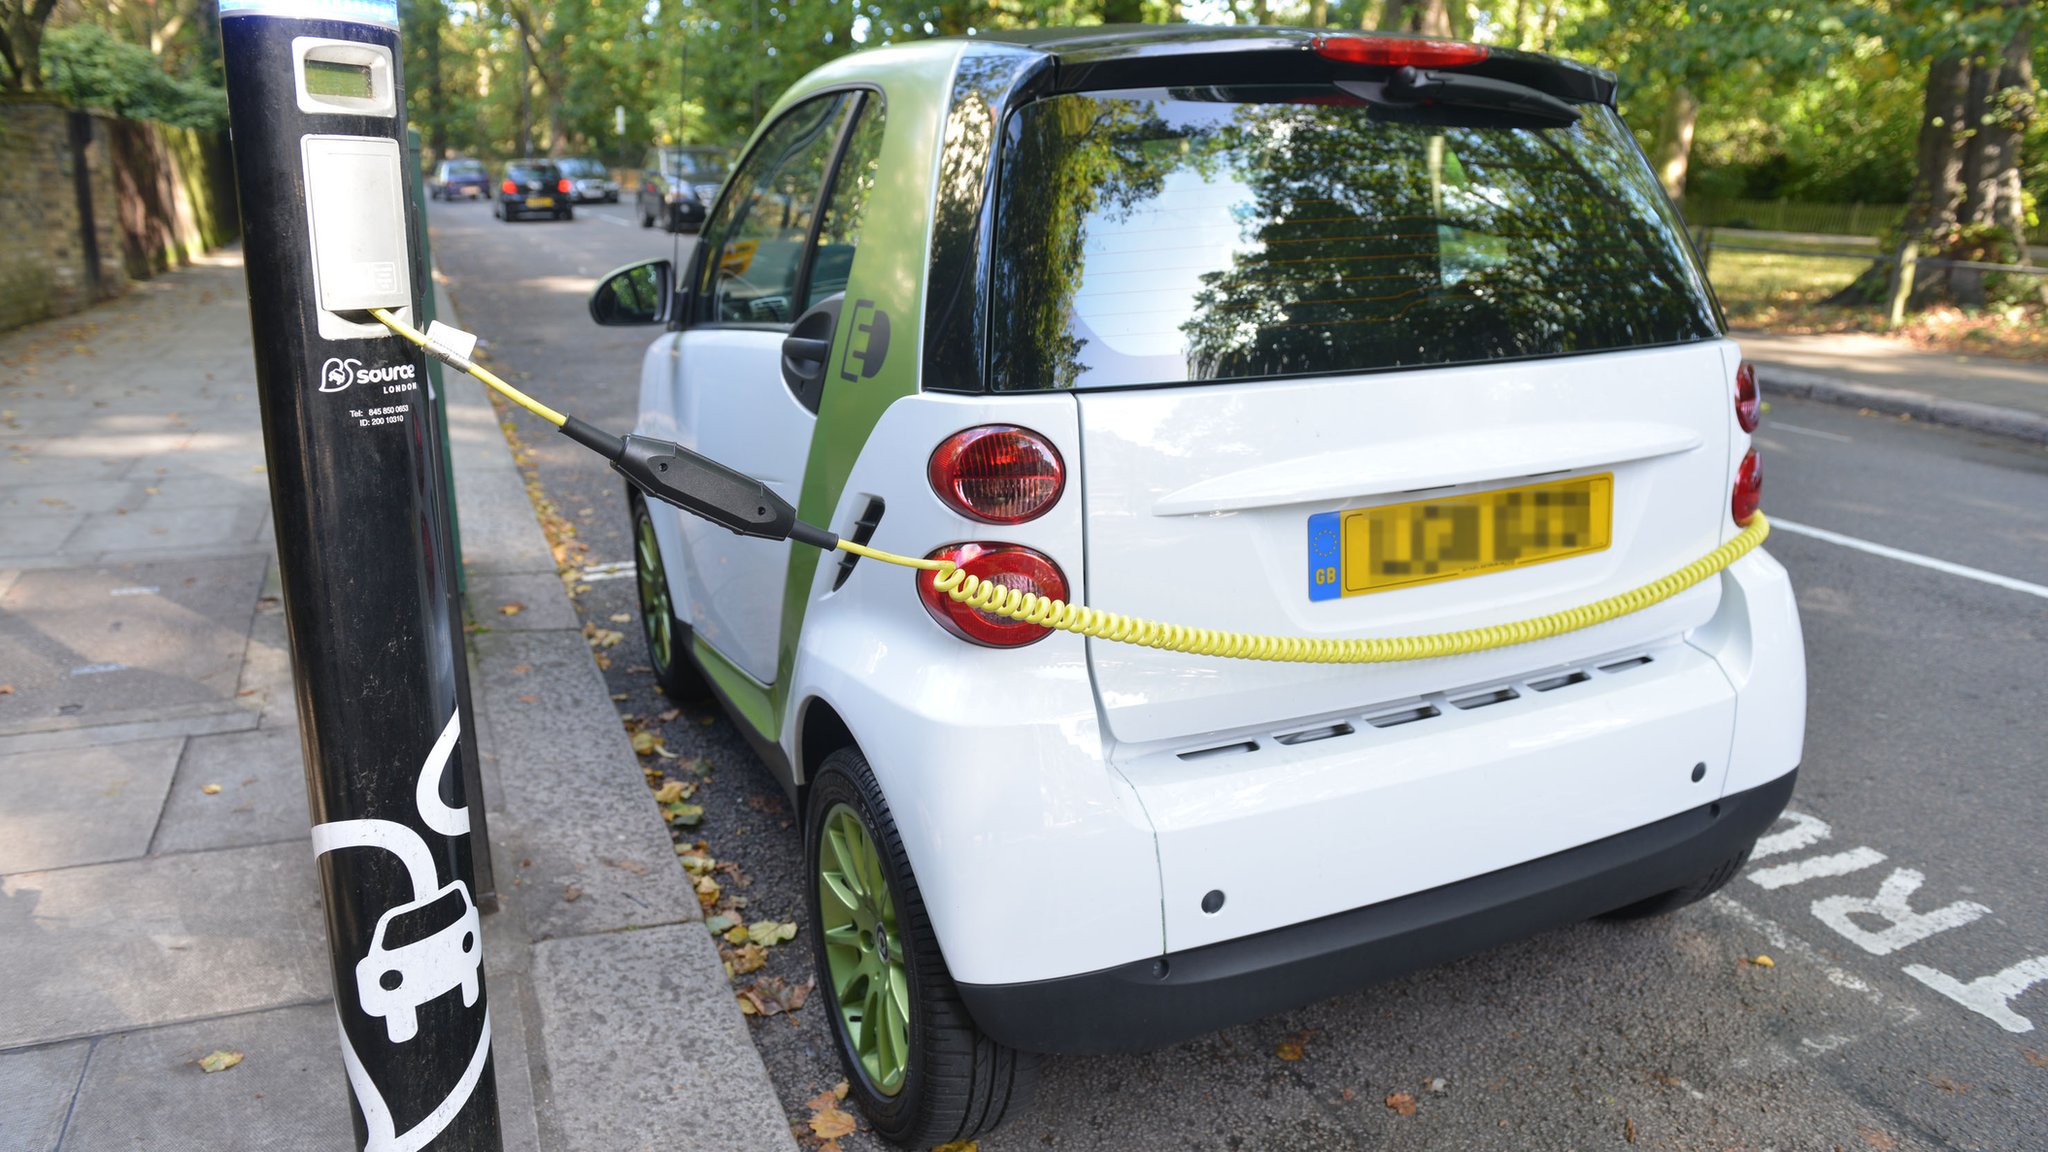 Plans for 100 more London ultra-rapid car chargers